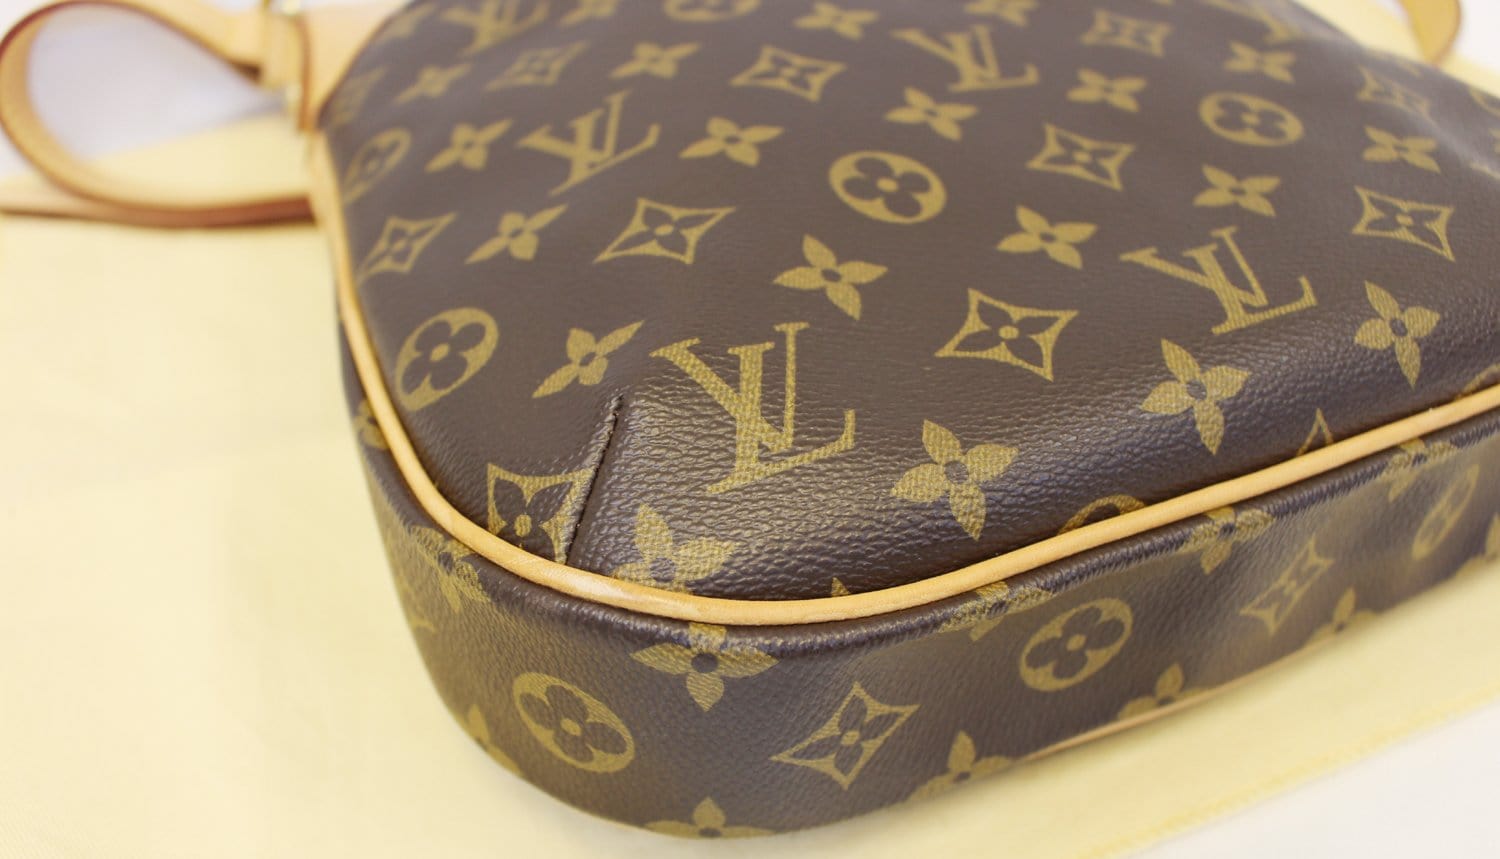 Pre-owned LV Odeon Monogram Canvas MM 215155/2